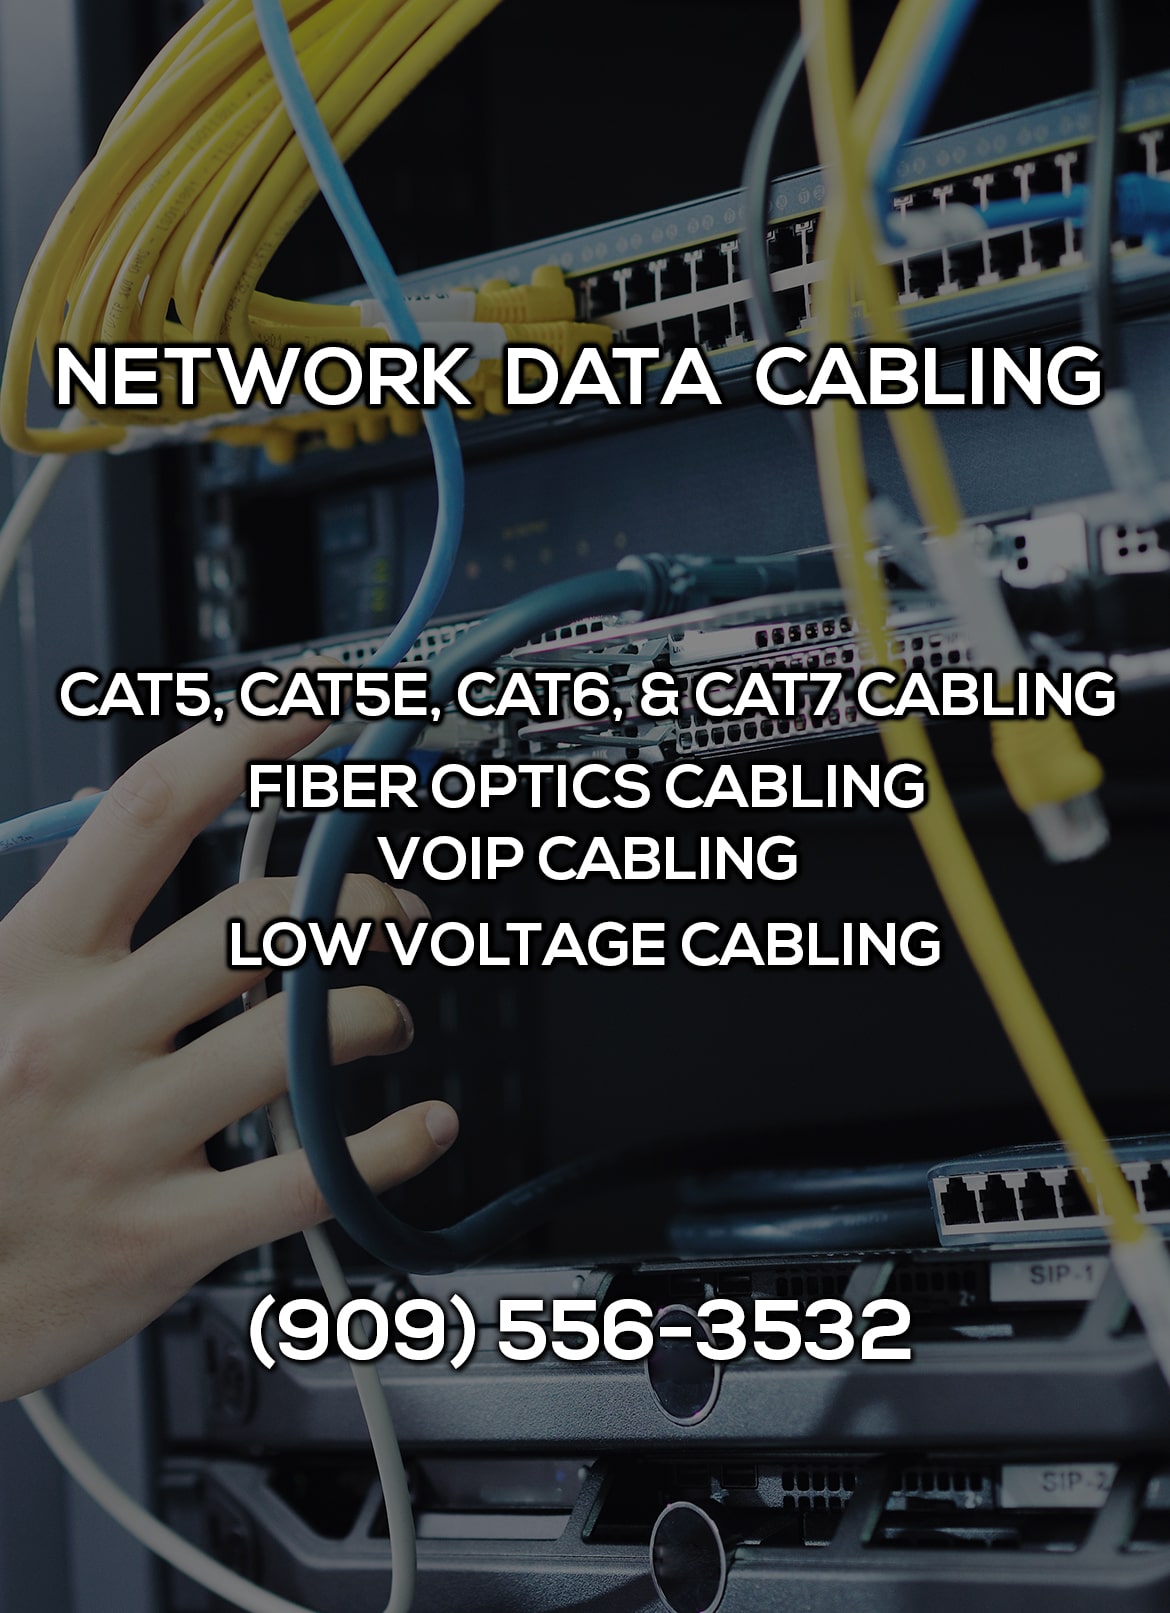 Network Data Cabling in Beaumont CA